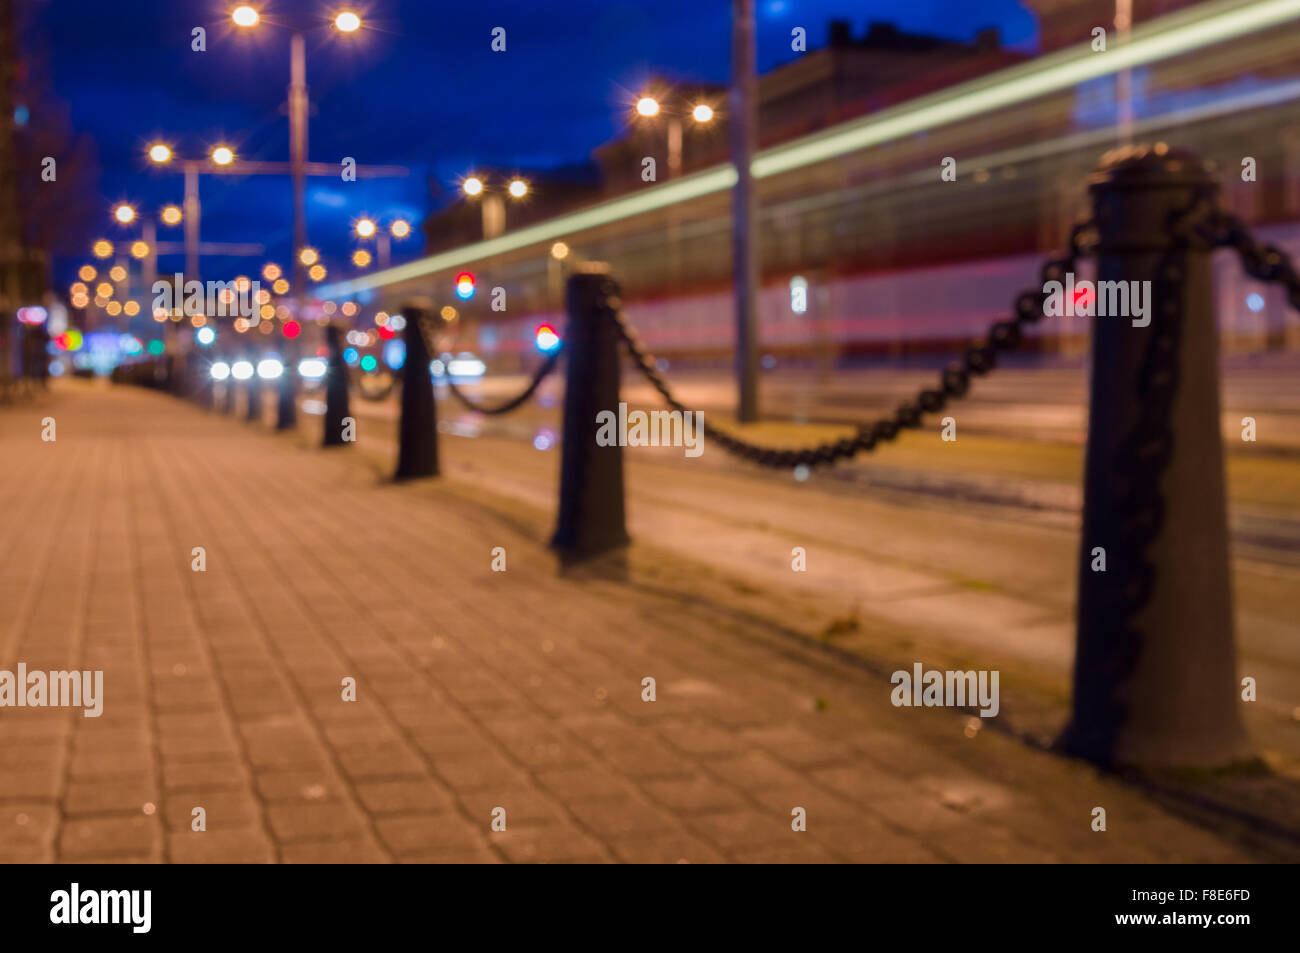 Trail of light left by tram, night city blurred image Stock Photo